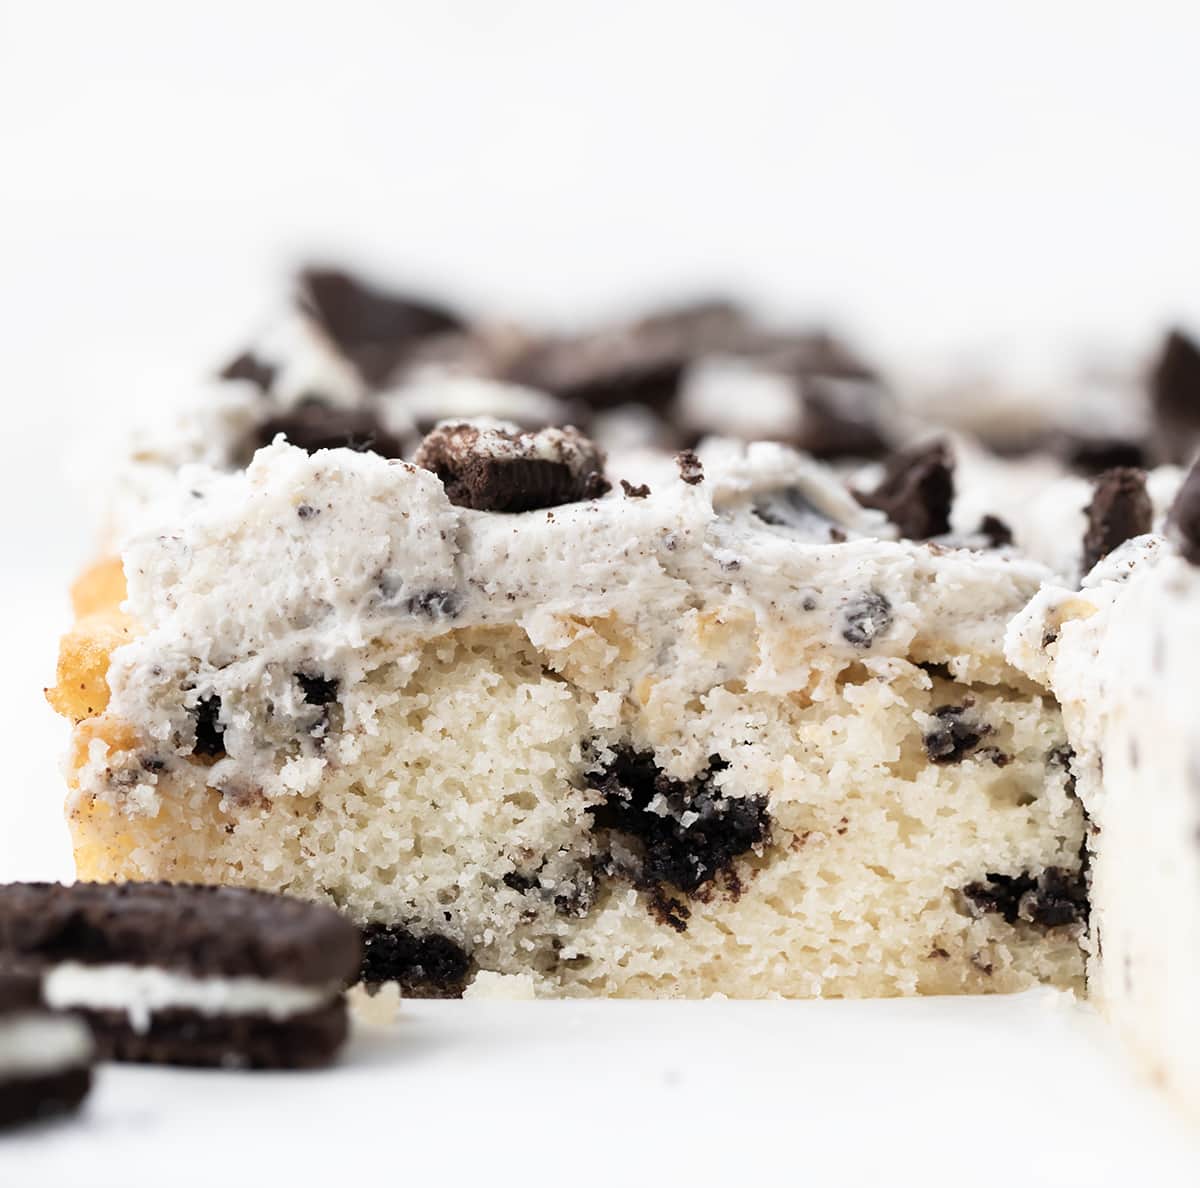 Piece of Cookies and Cream Sheet Cake close up showing tender crumb.